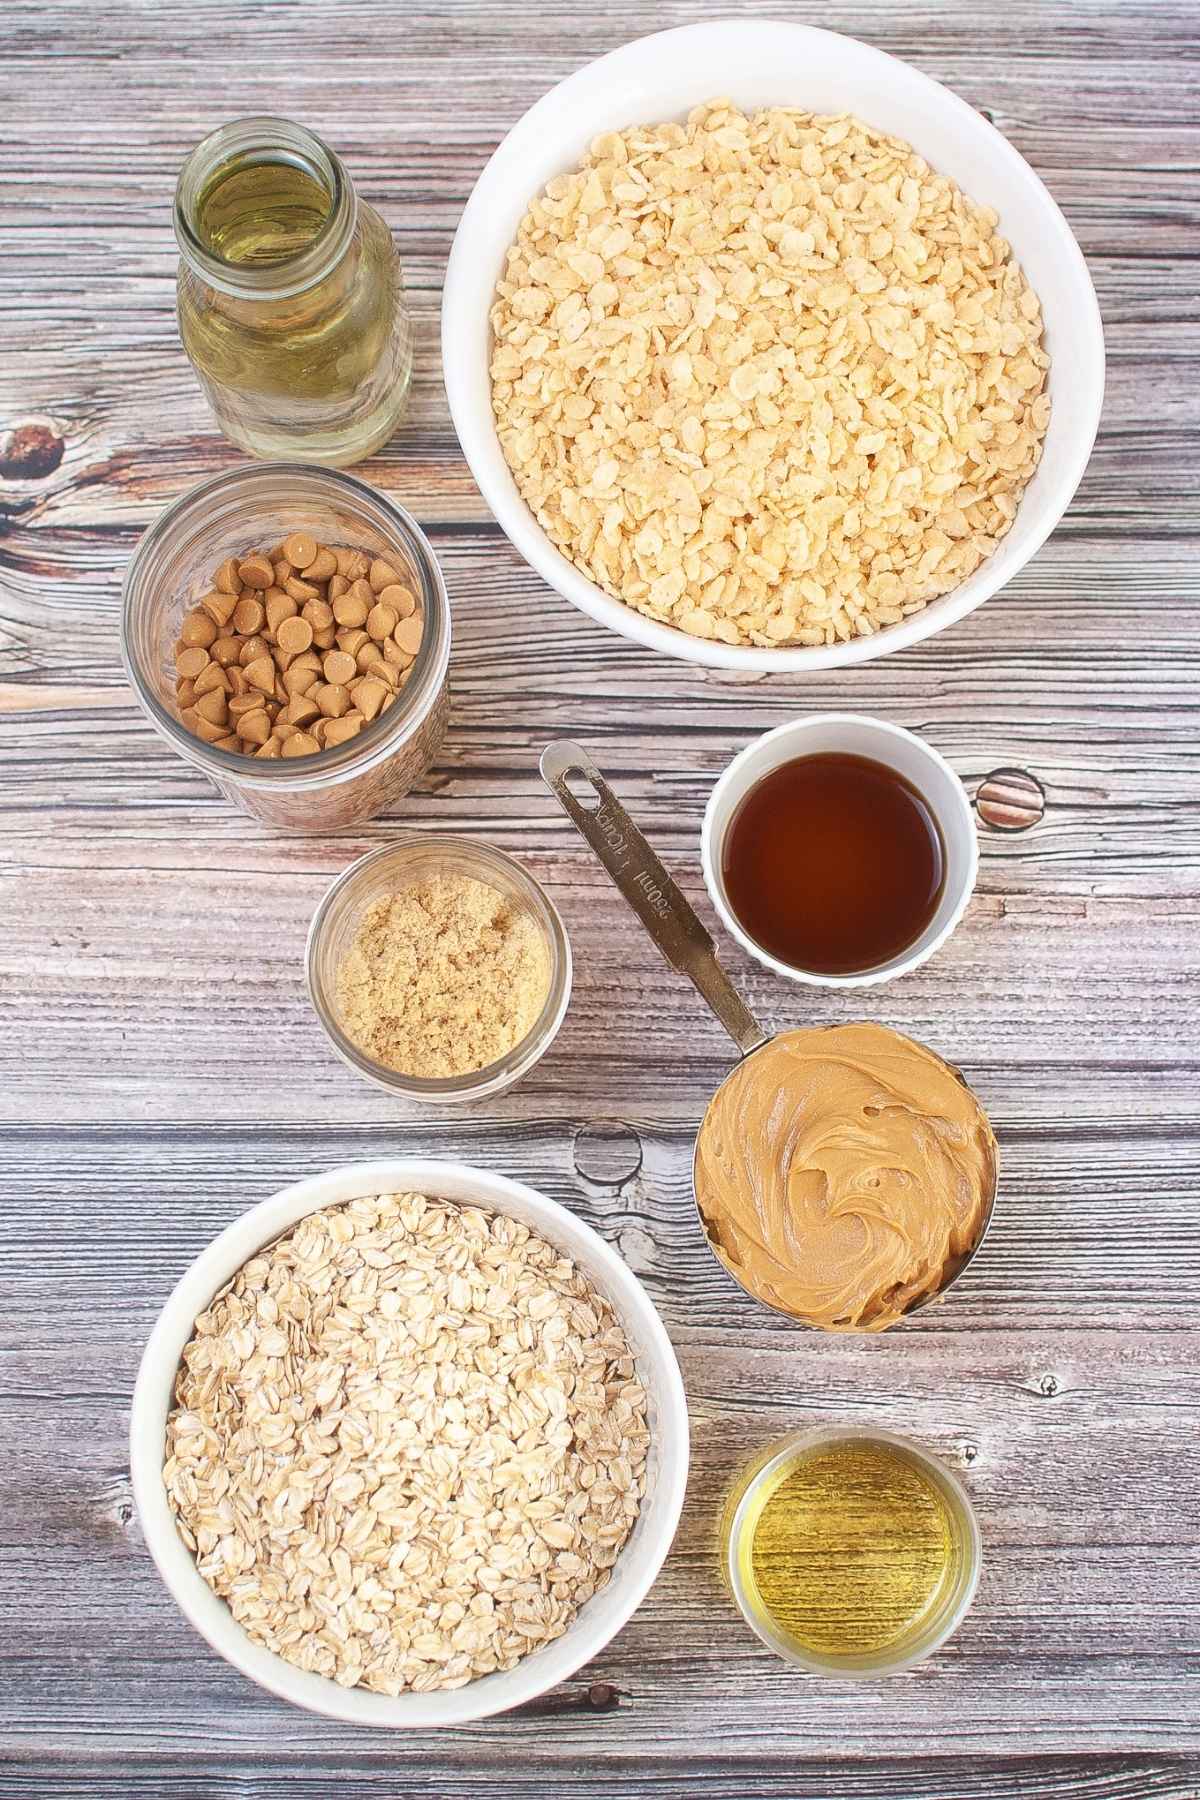 Ingredients for Peanut Butter Granola Bars.